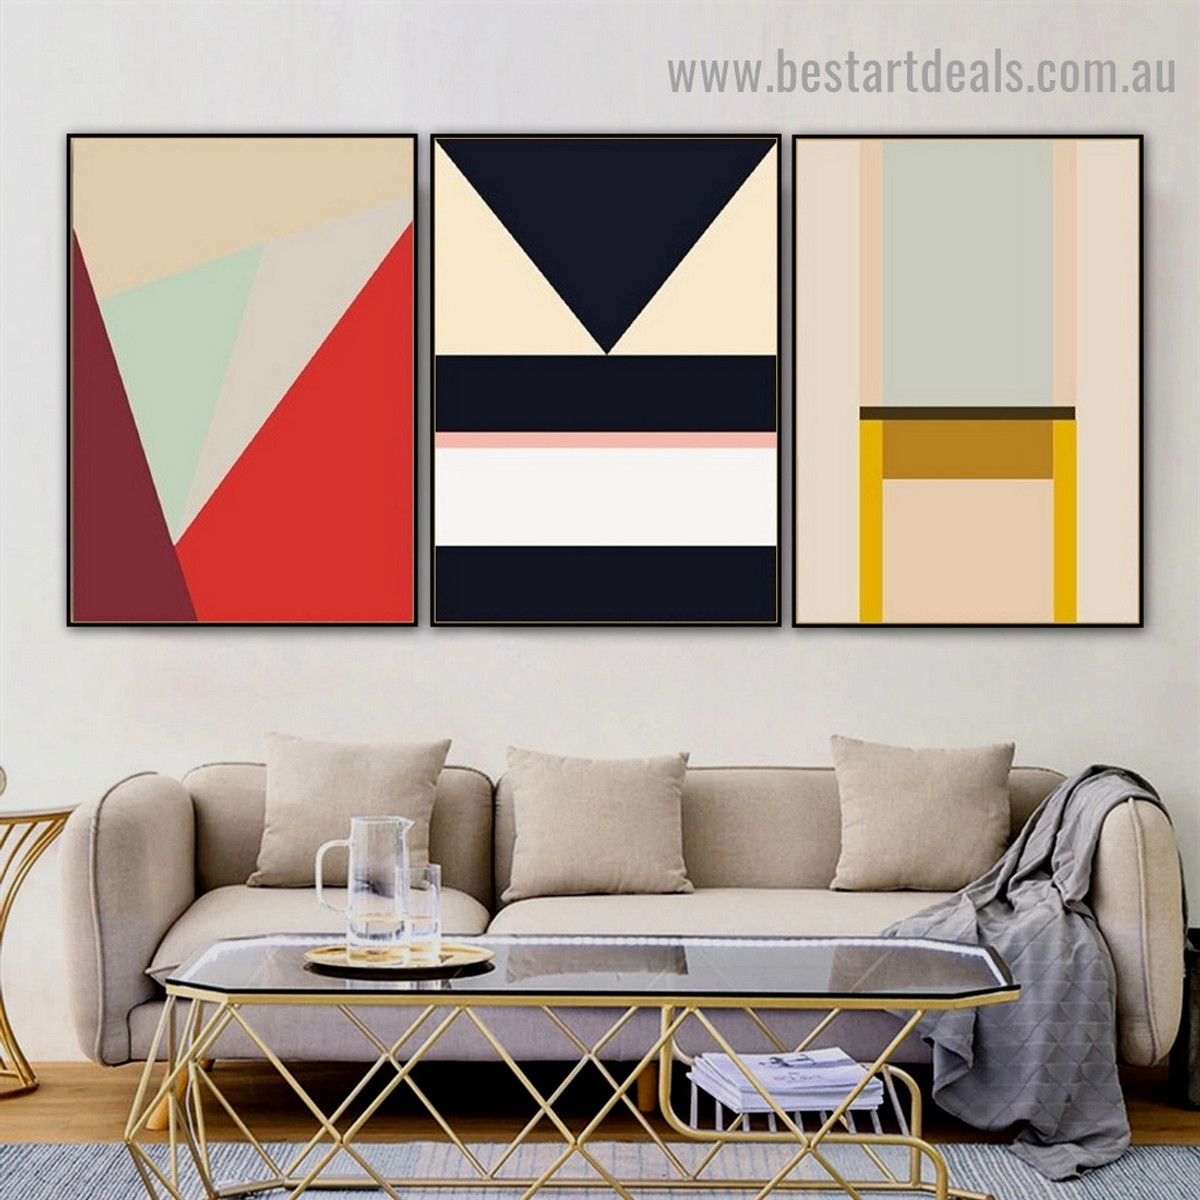 Reverse Triangle Abstract Geometric Modern Framed Artwork Picture Canvas Print for Room Wall Garnish